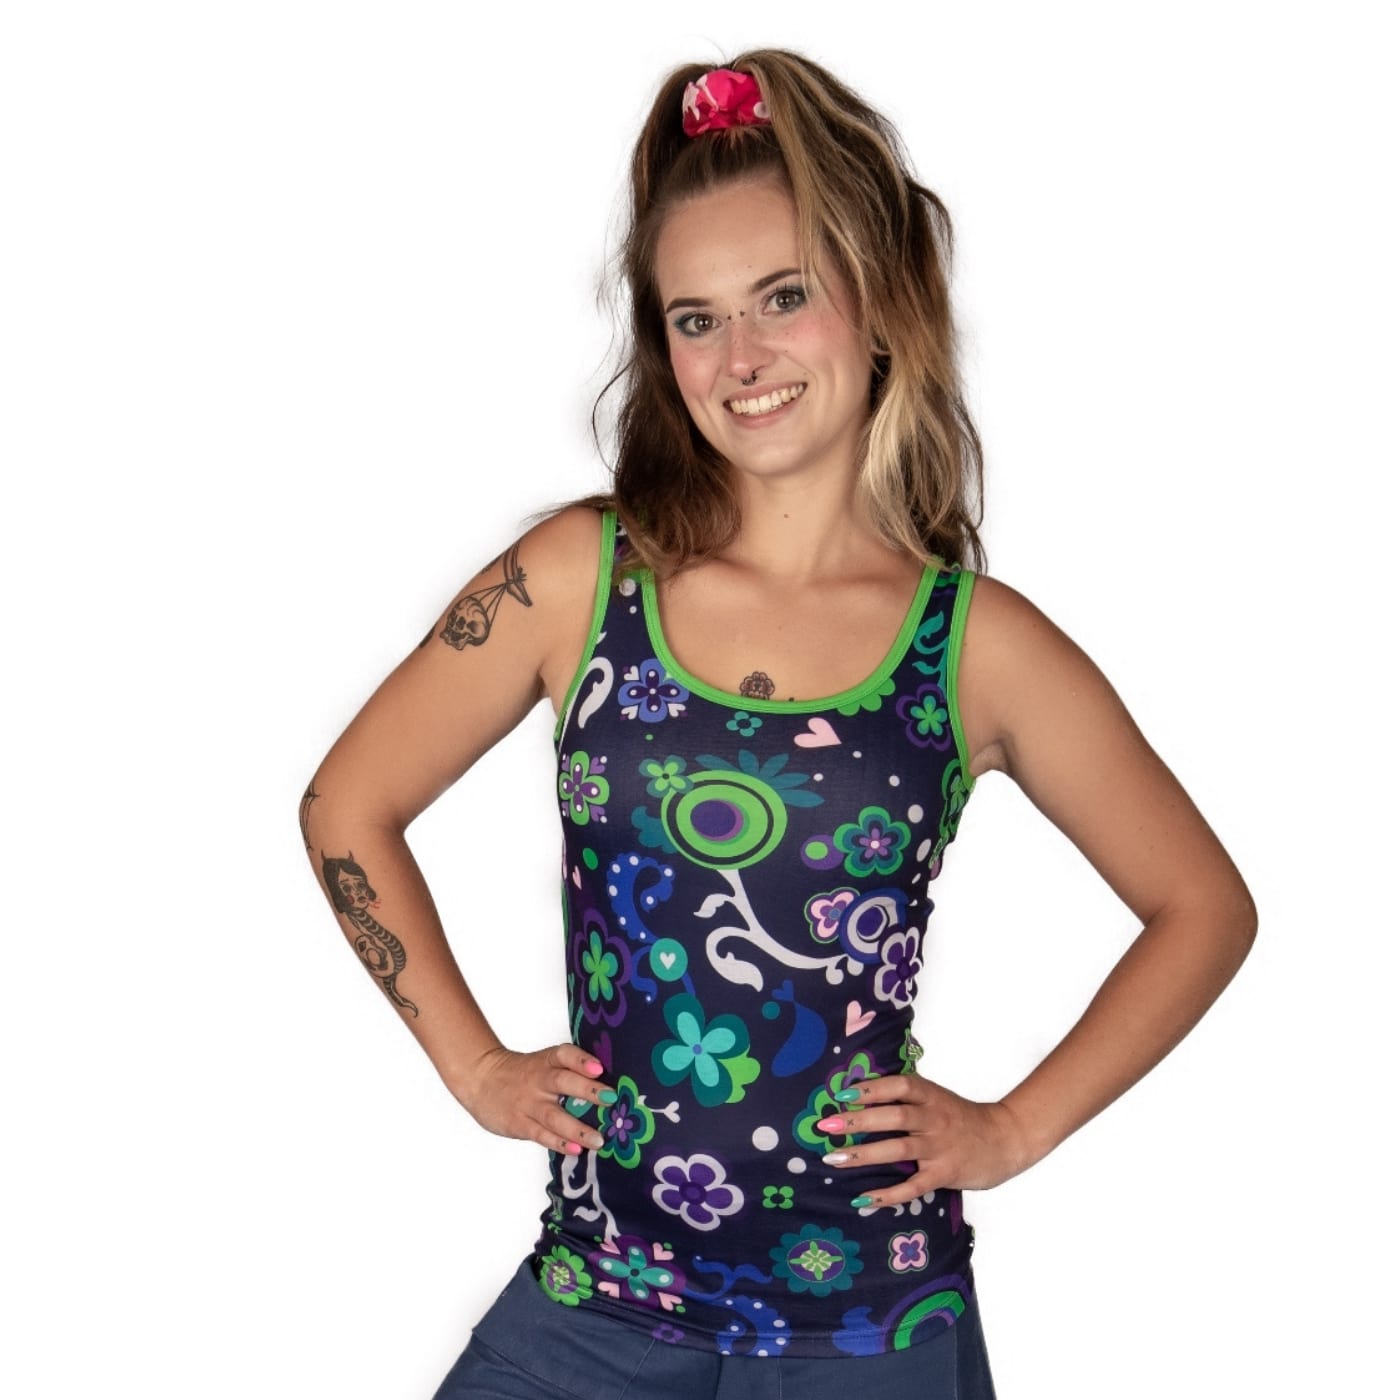 Groovy Enchantment Singlet Top by RainbowsAndFairies.com.au (Psychedelic - Woodstock - Green & Purple - Vintage Inspired - Kitsch - Abstract - Tank Top) - SKU: CL_SGLET_GROOV_ENT - Pic-06